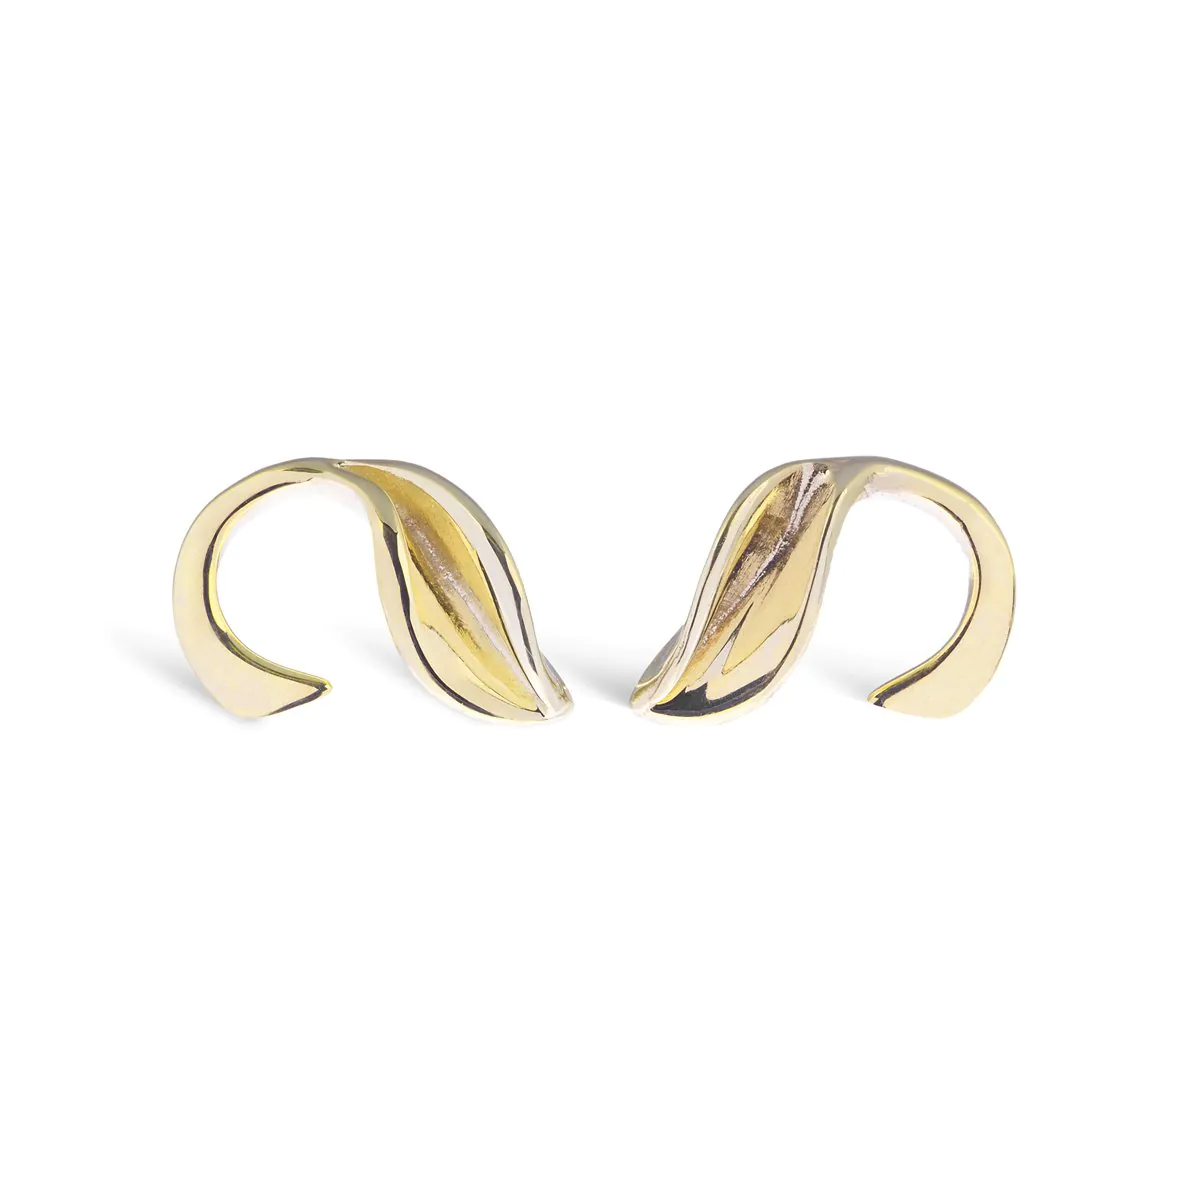 Curled Leaf and Stem Studs (Sterling Silver/Gold) - Armed & Gorgeous ...